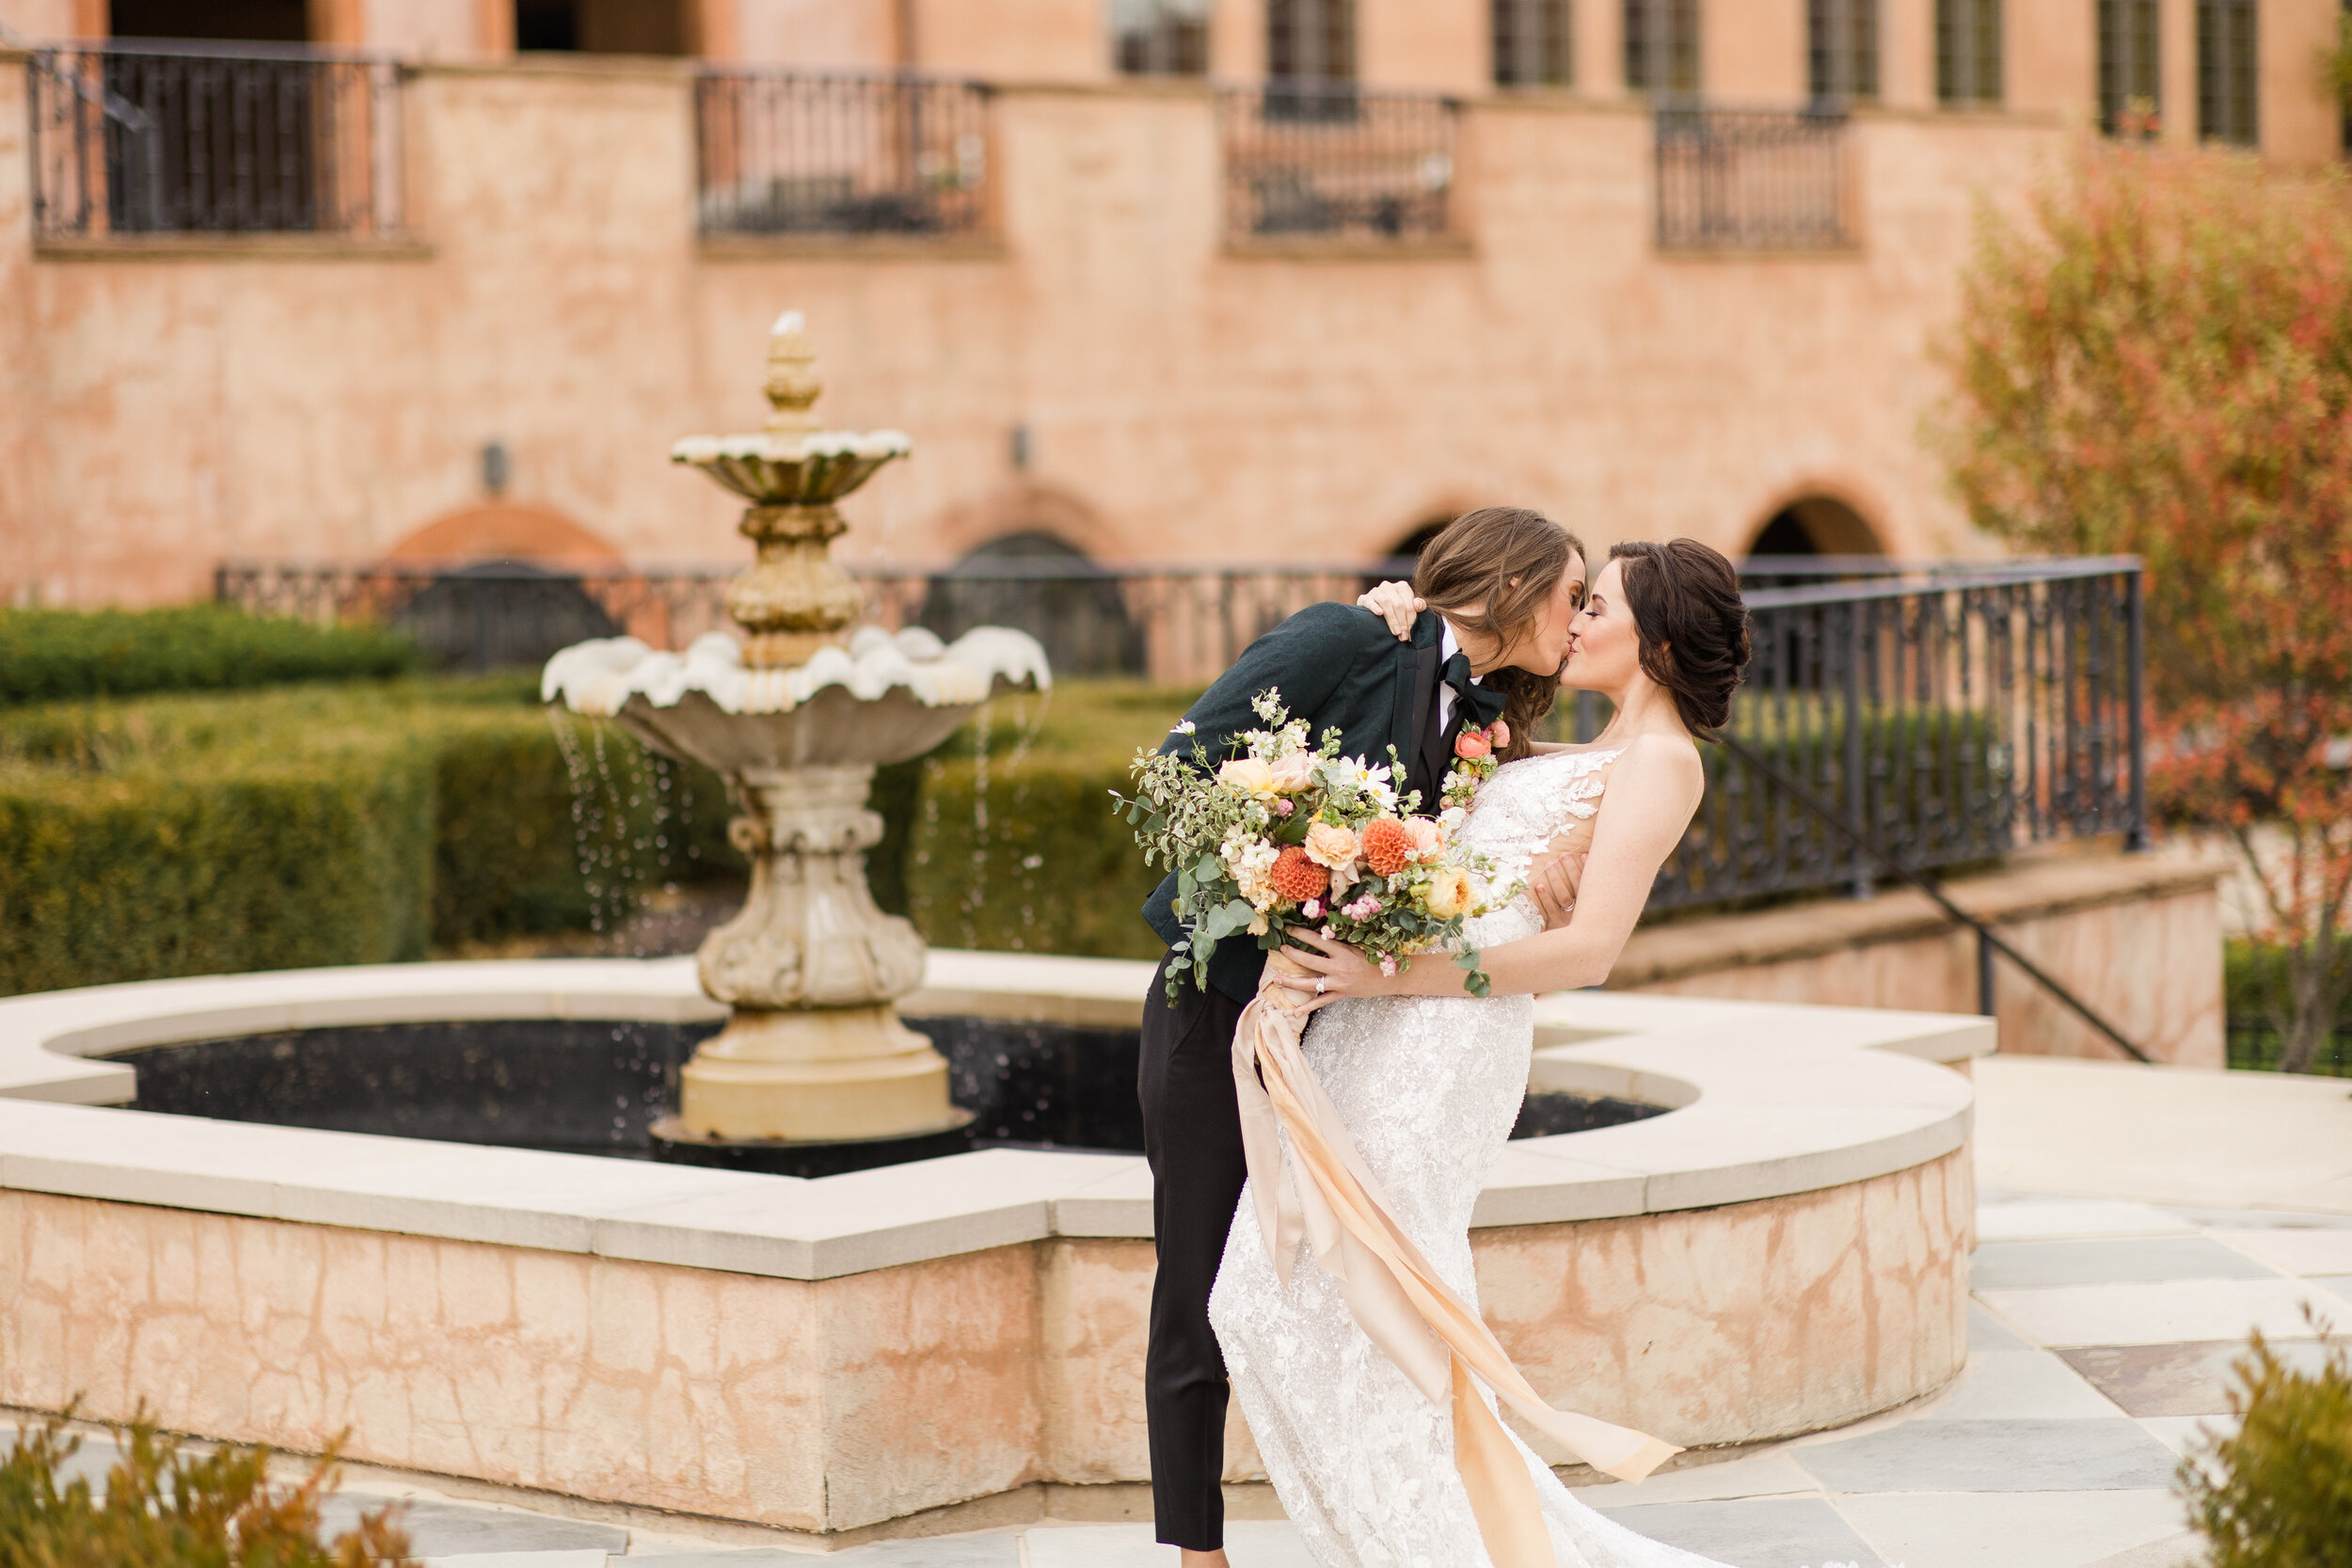 Autumn wedding inspiration at The Club at Corazon.